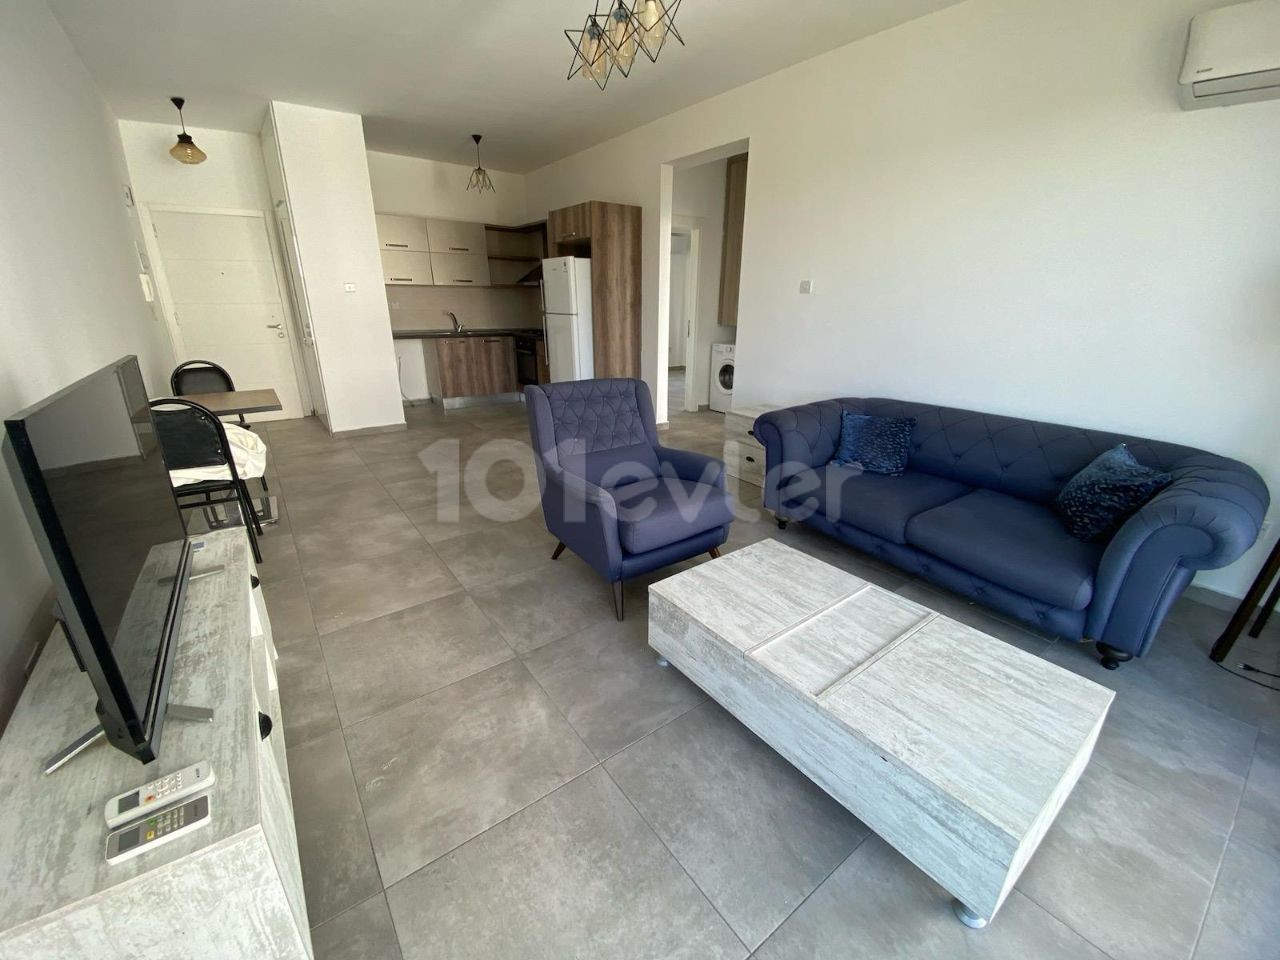 Fully Furnished 2+1 Flat for Rent in Ortaköy